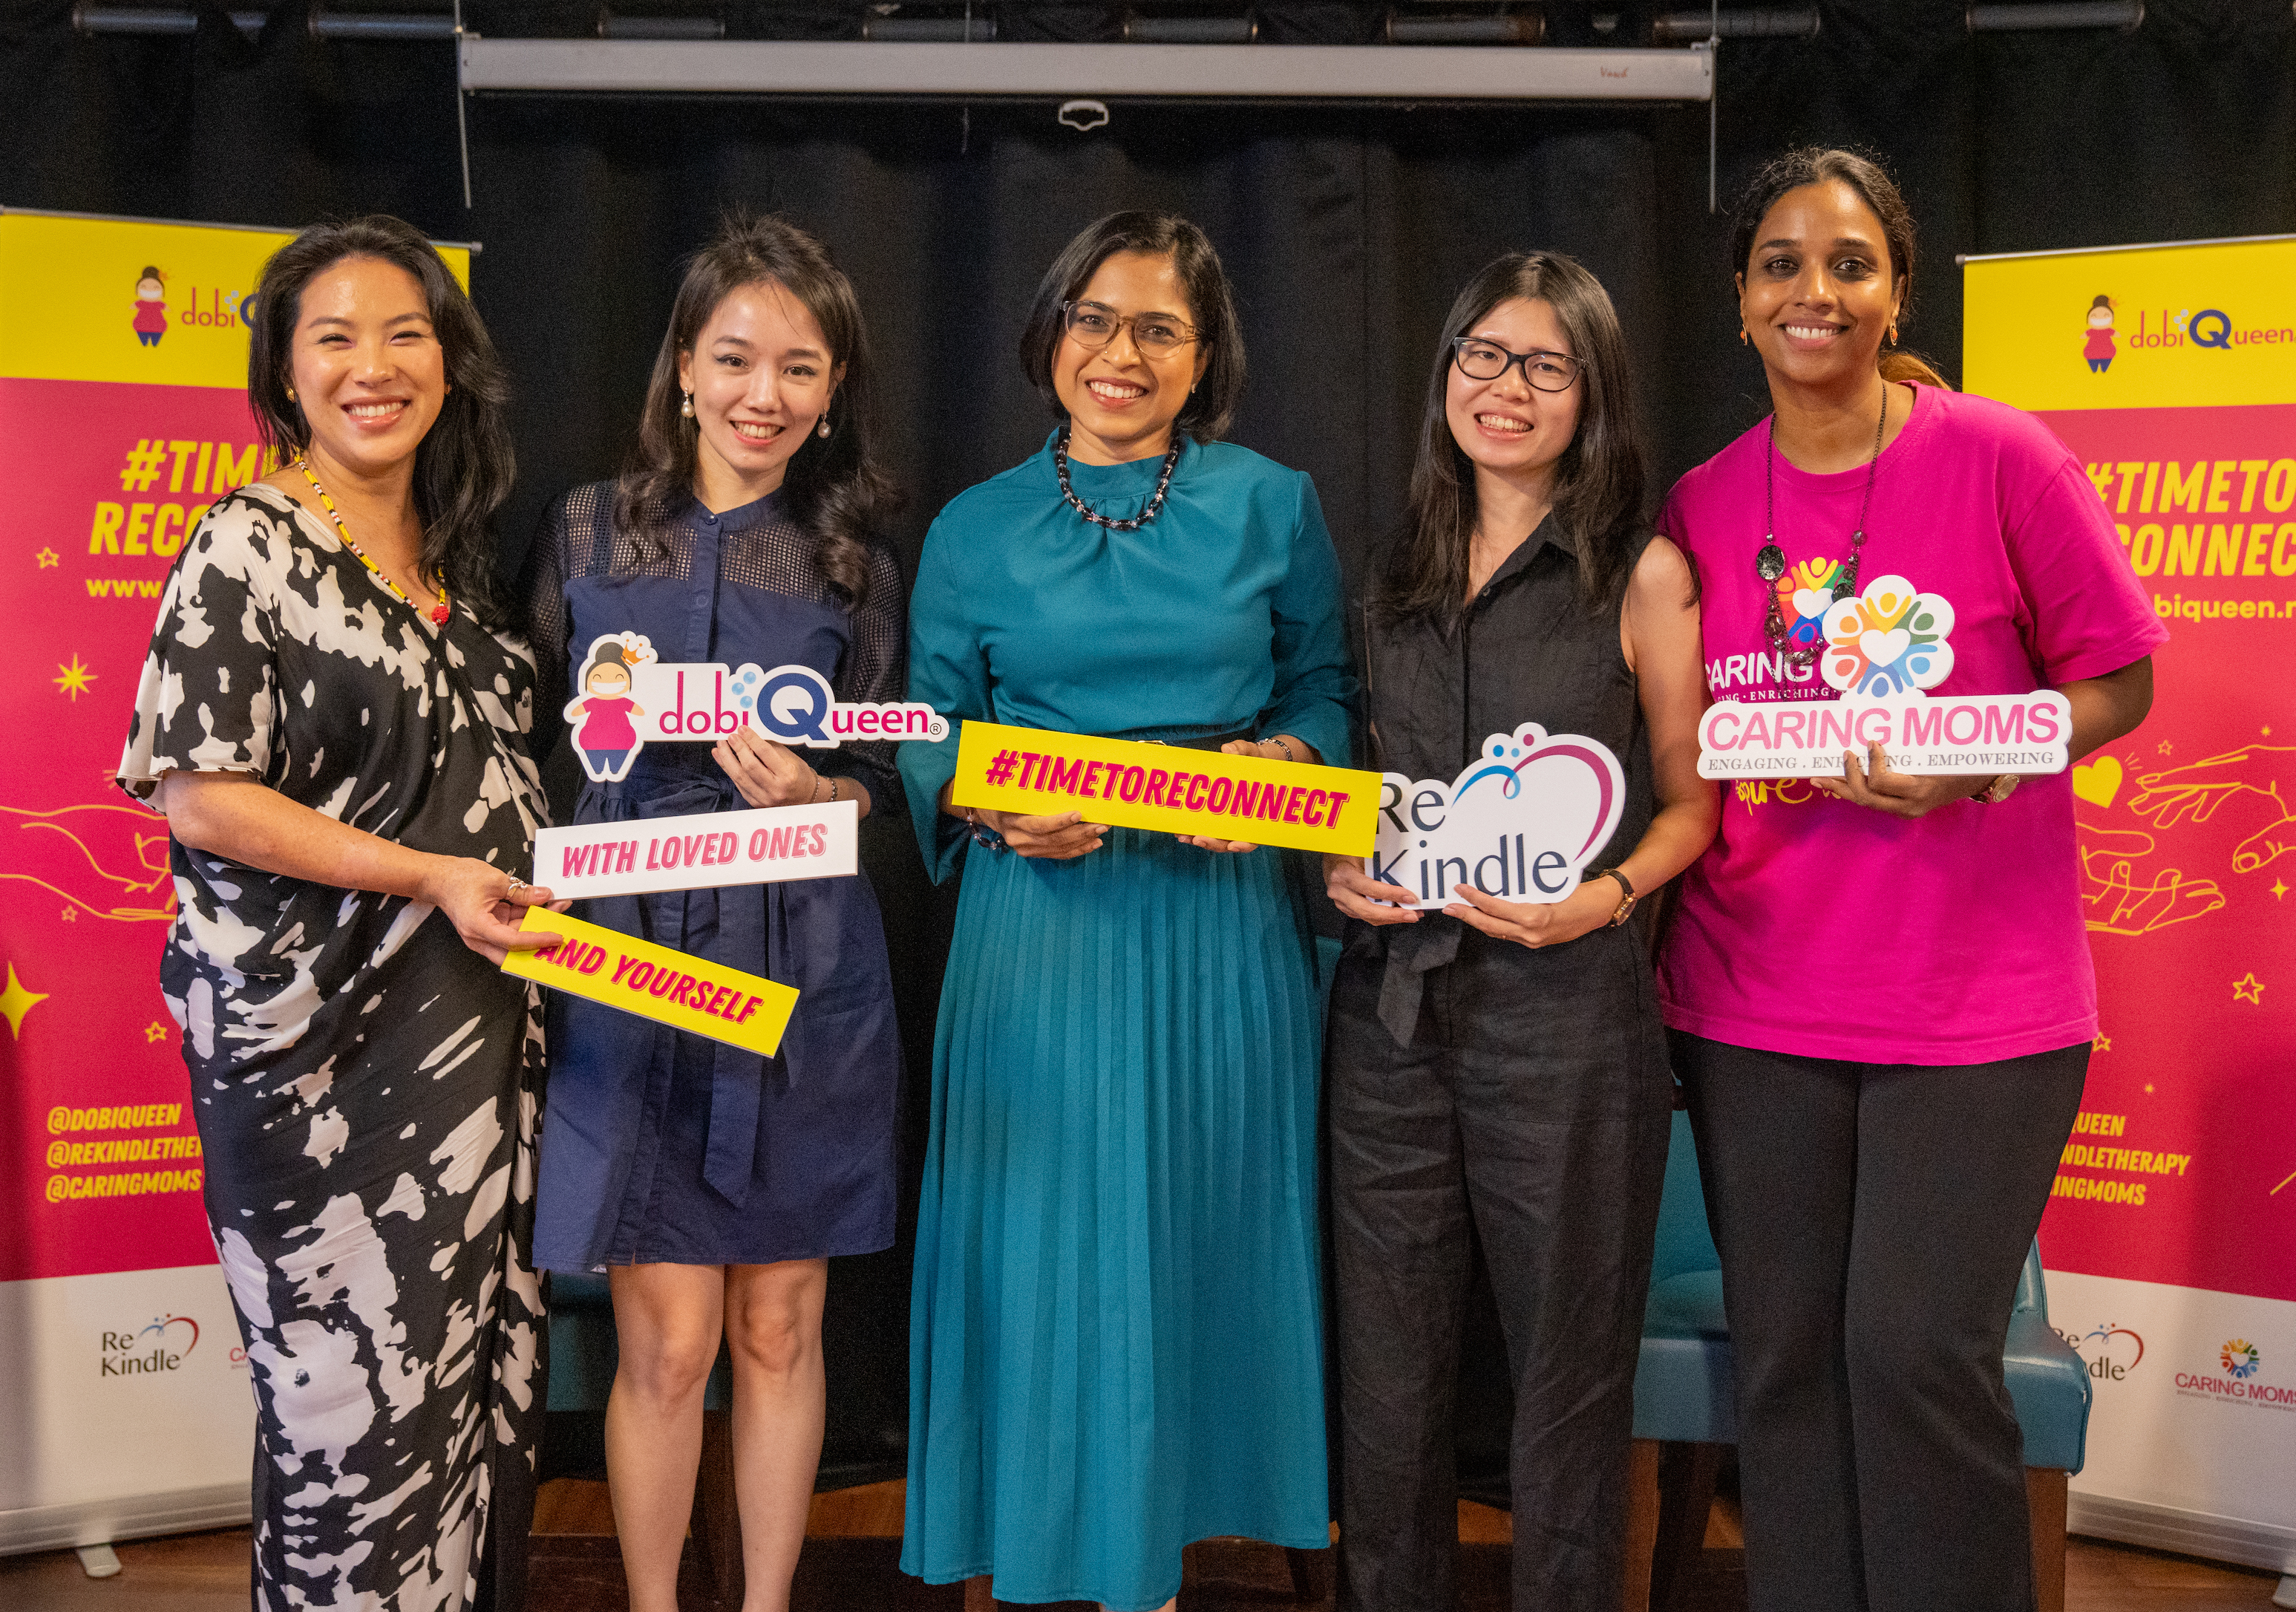 (Left to right): Eugenie Chan, Co-Founder of Suppagood, Nini Tan, Co-Founder of dobiQueen, Franzeene Nadia A/P Rajasegaran, Assistant Director, Strategic Partnership Division, Department of Women Development; Ministry of Women, Family and Community Development, Alycia Lum, Marriage & Family Therapist and Major (Retired) Shera Ann Bosco, Founder, CARING MOMS Group Sdn Bhd